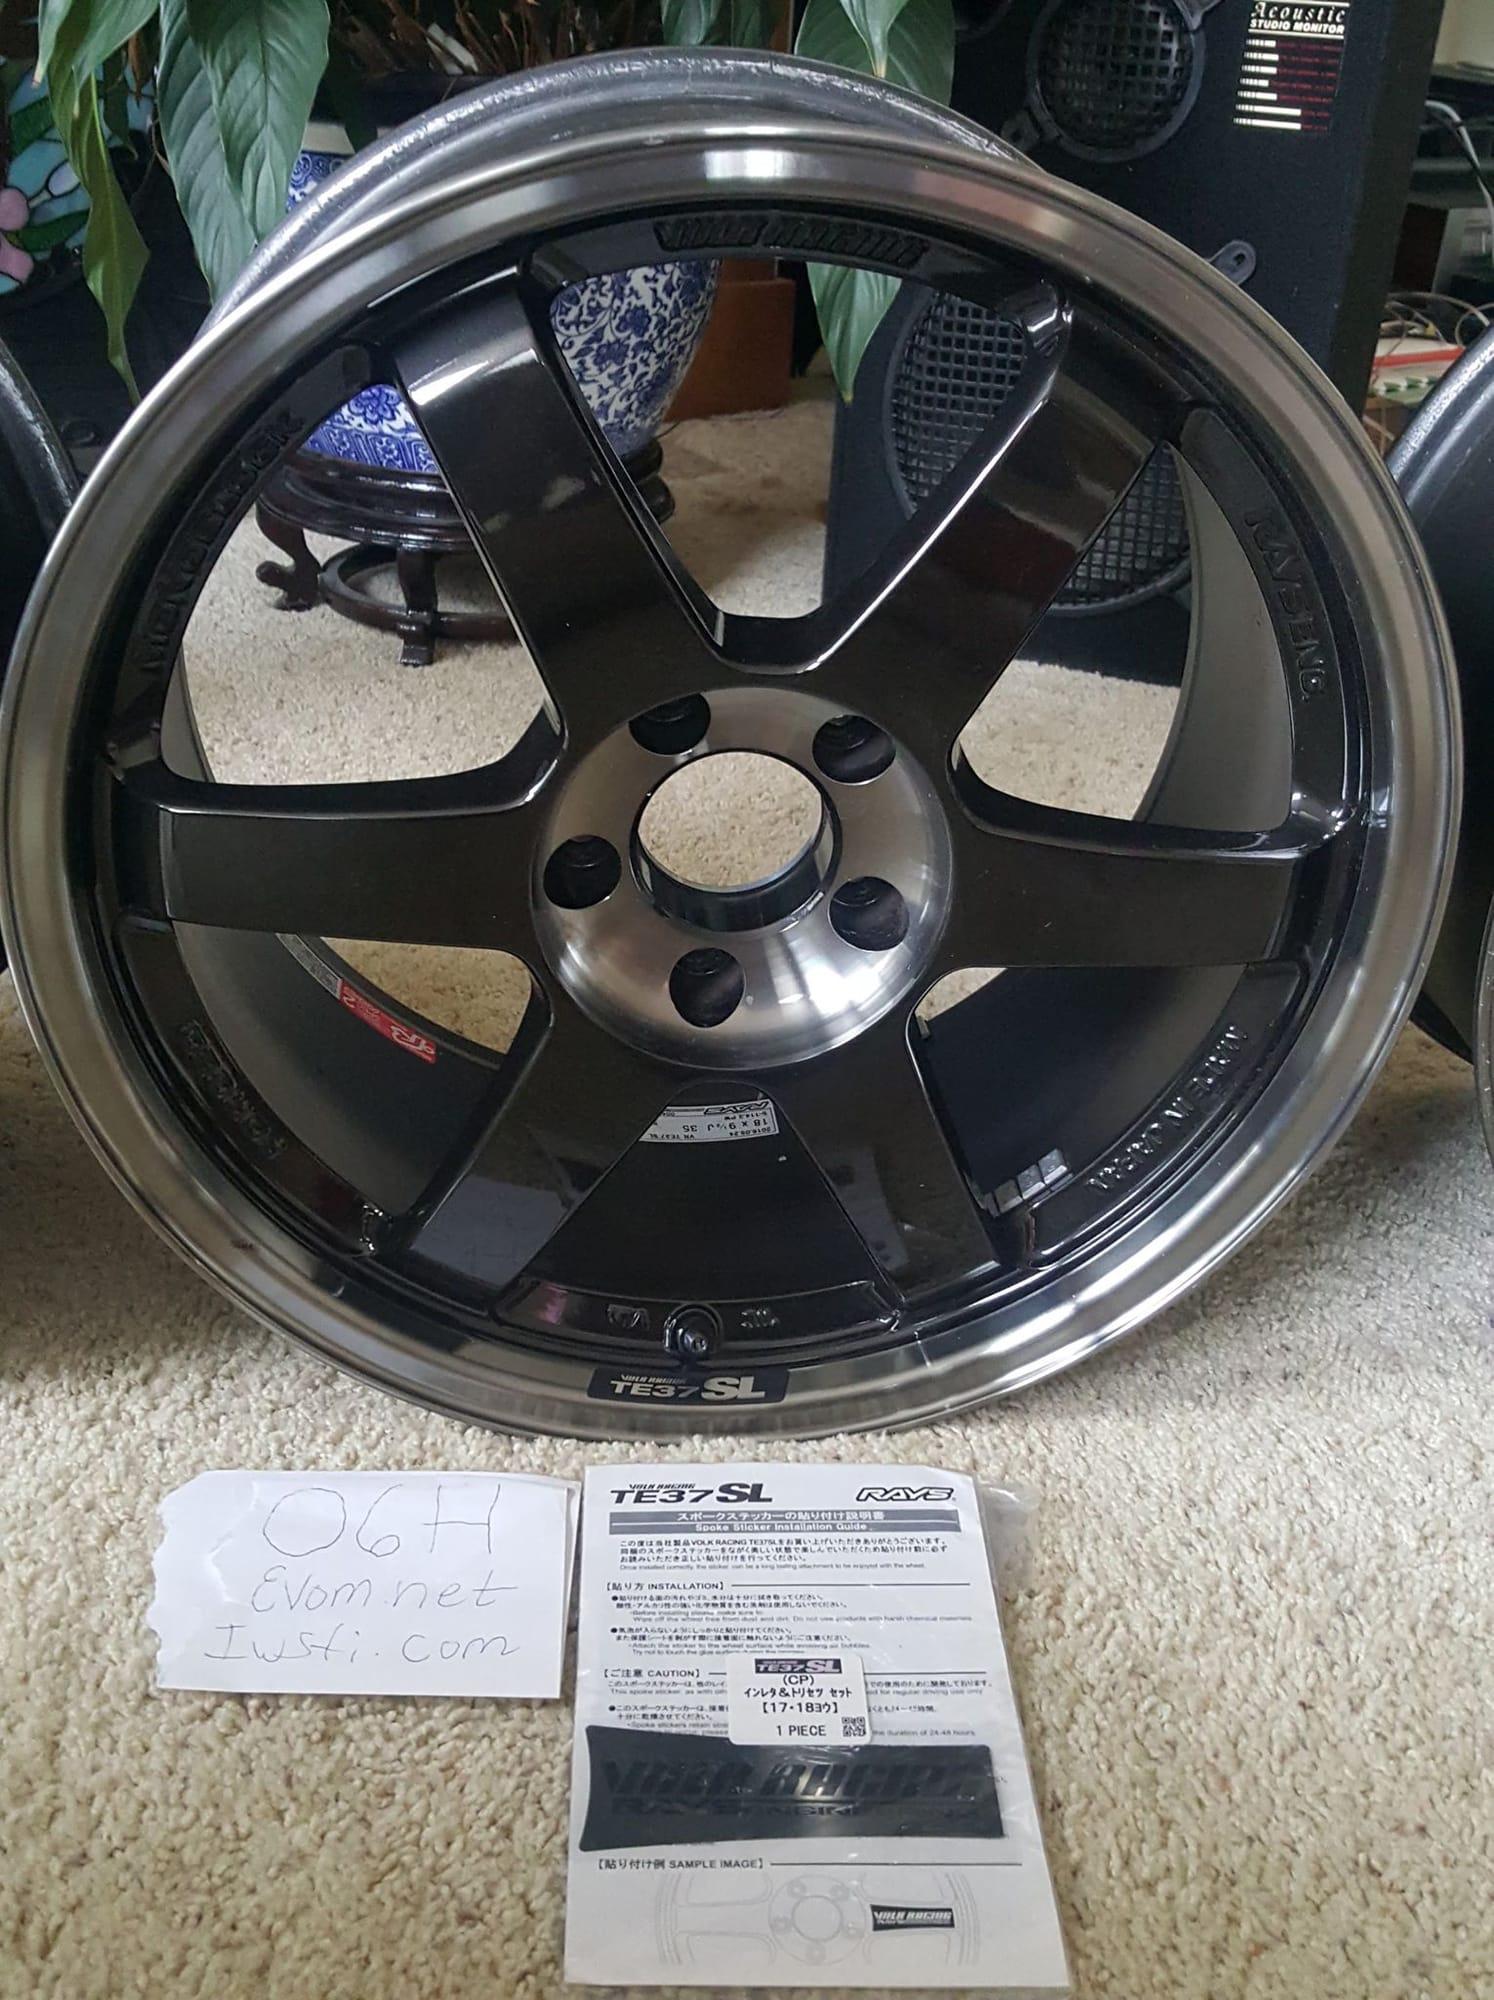 Wheels and Tires/Axles - FS/FT:Rays Volk Racing TE37SL PDX, OR - Used - 2000 to 2018 Mitsubishi Lancer Evolution - Portland, OR 97236, United States